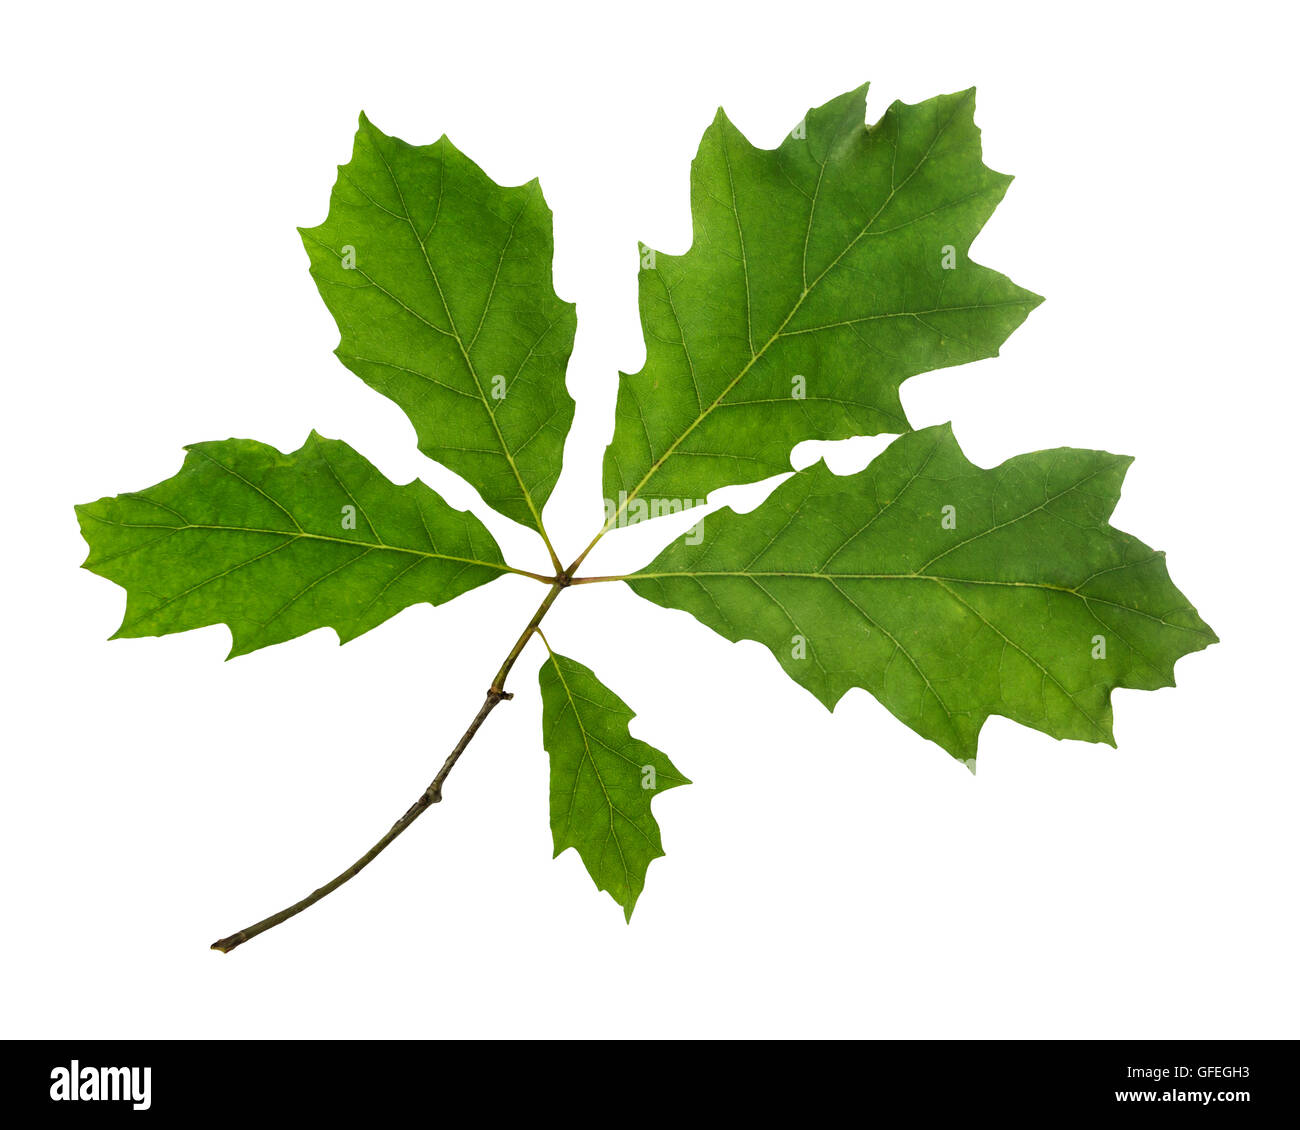 Red oak leaves cut out on white background Stock Photo